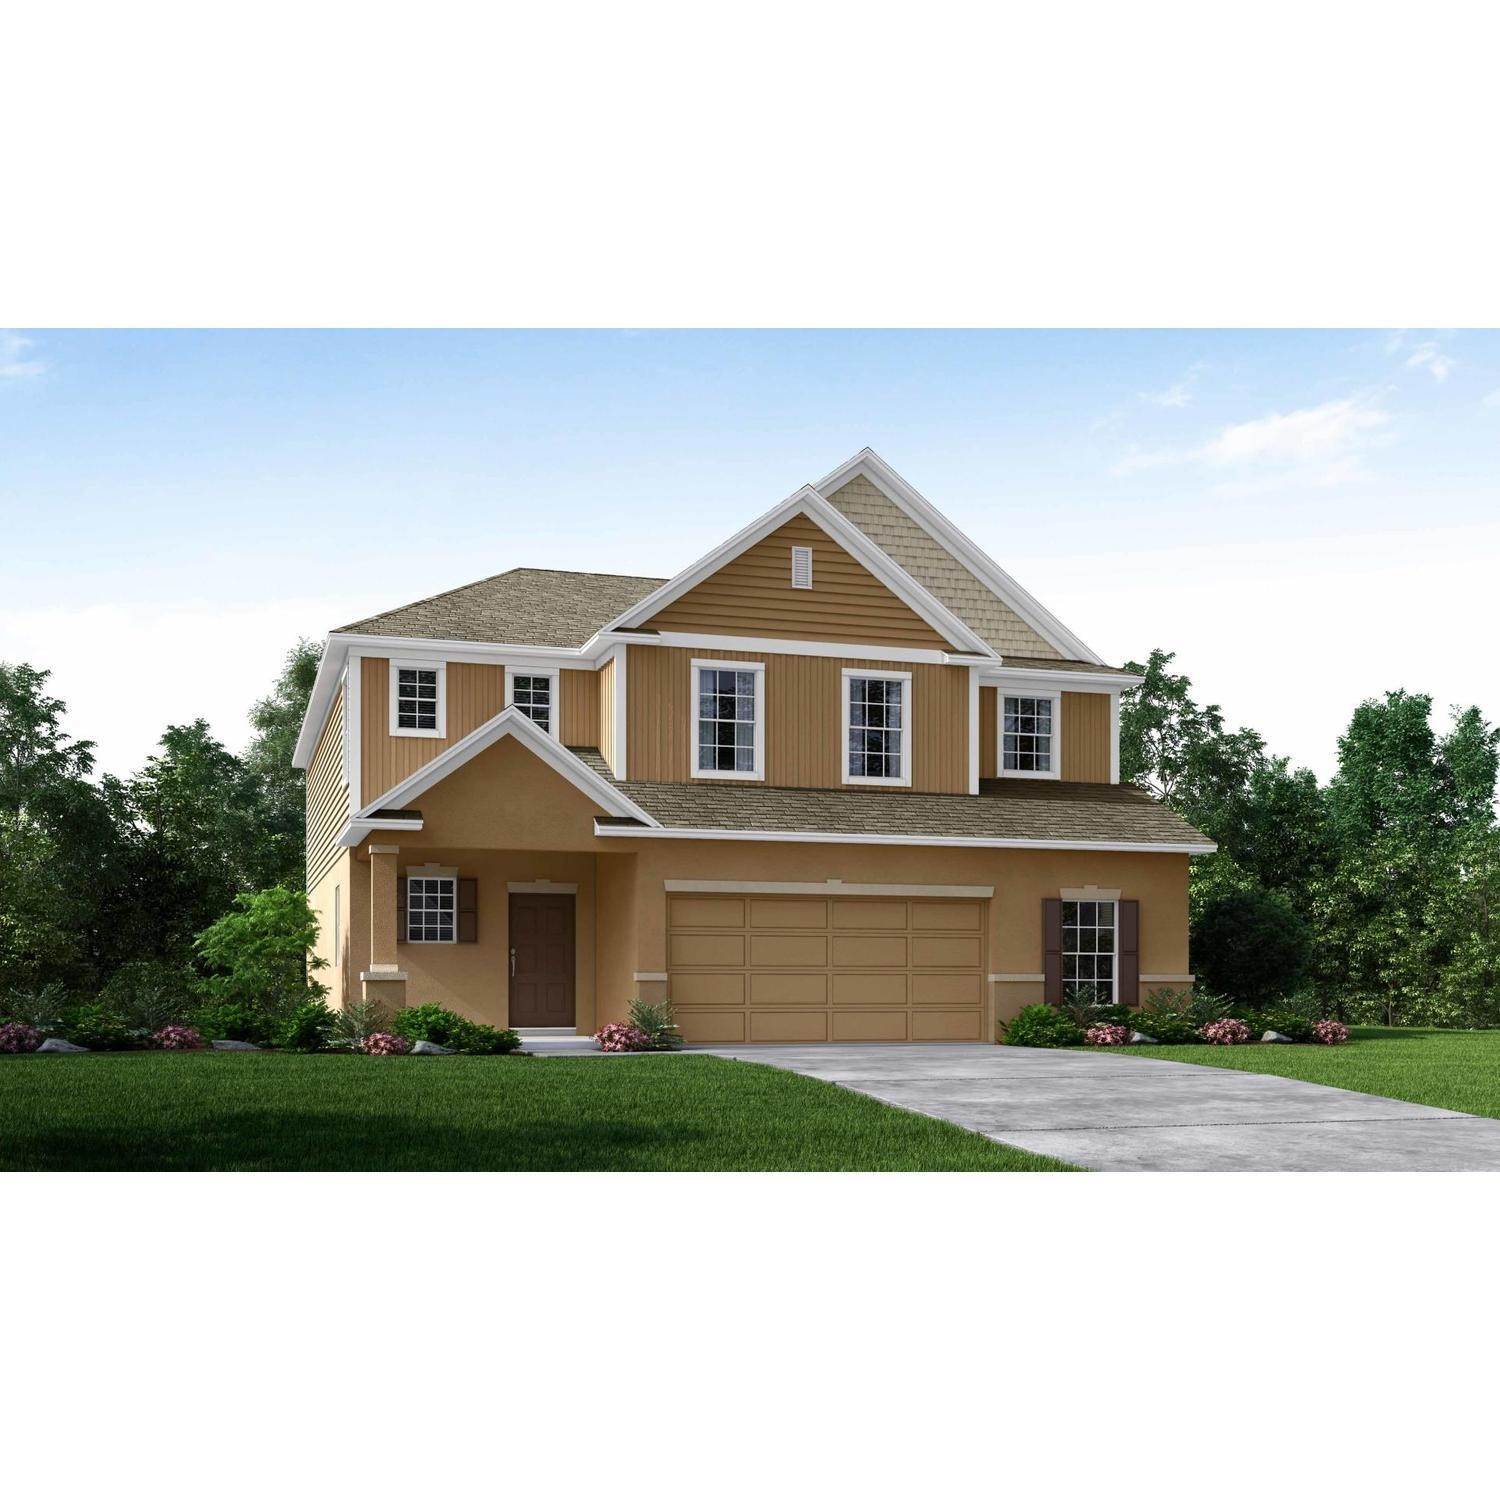 Single Family for Sale at Fox Meadows - Columbus 1521 Lake Foxmeadow Rd MIDDLEBURG, FLORIDA 32068 UNITED STATES